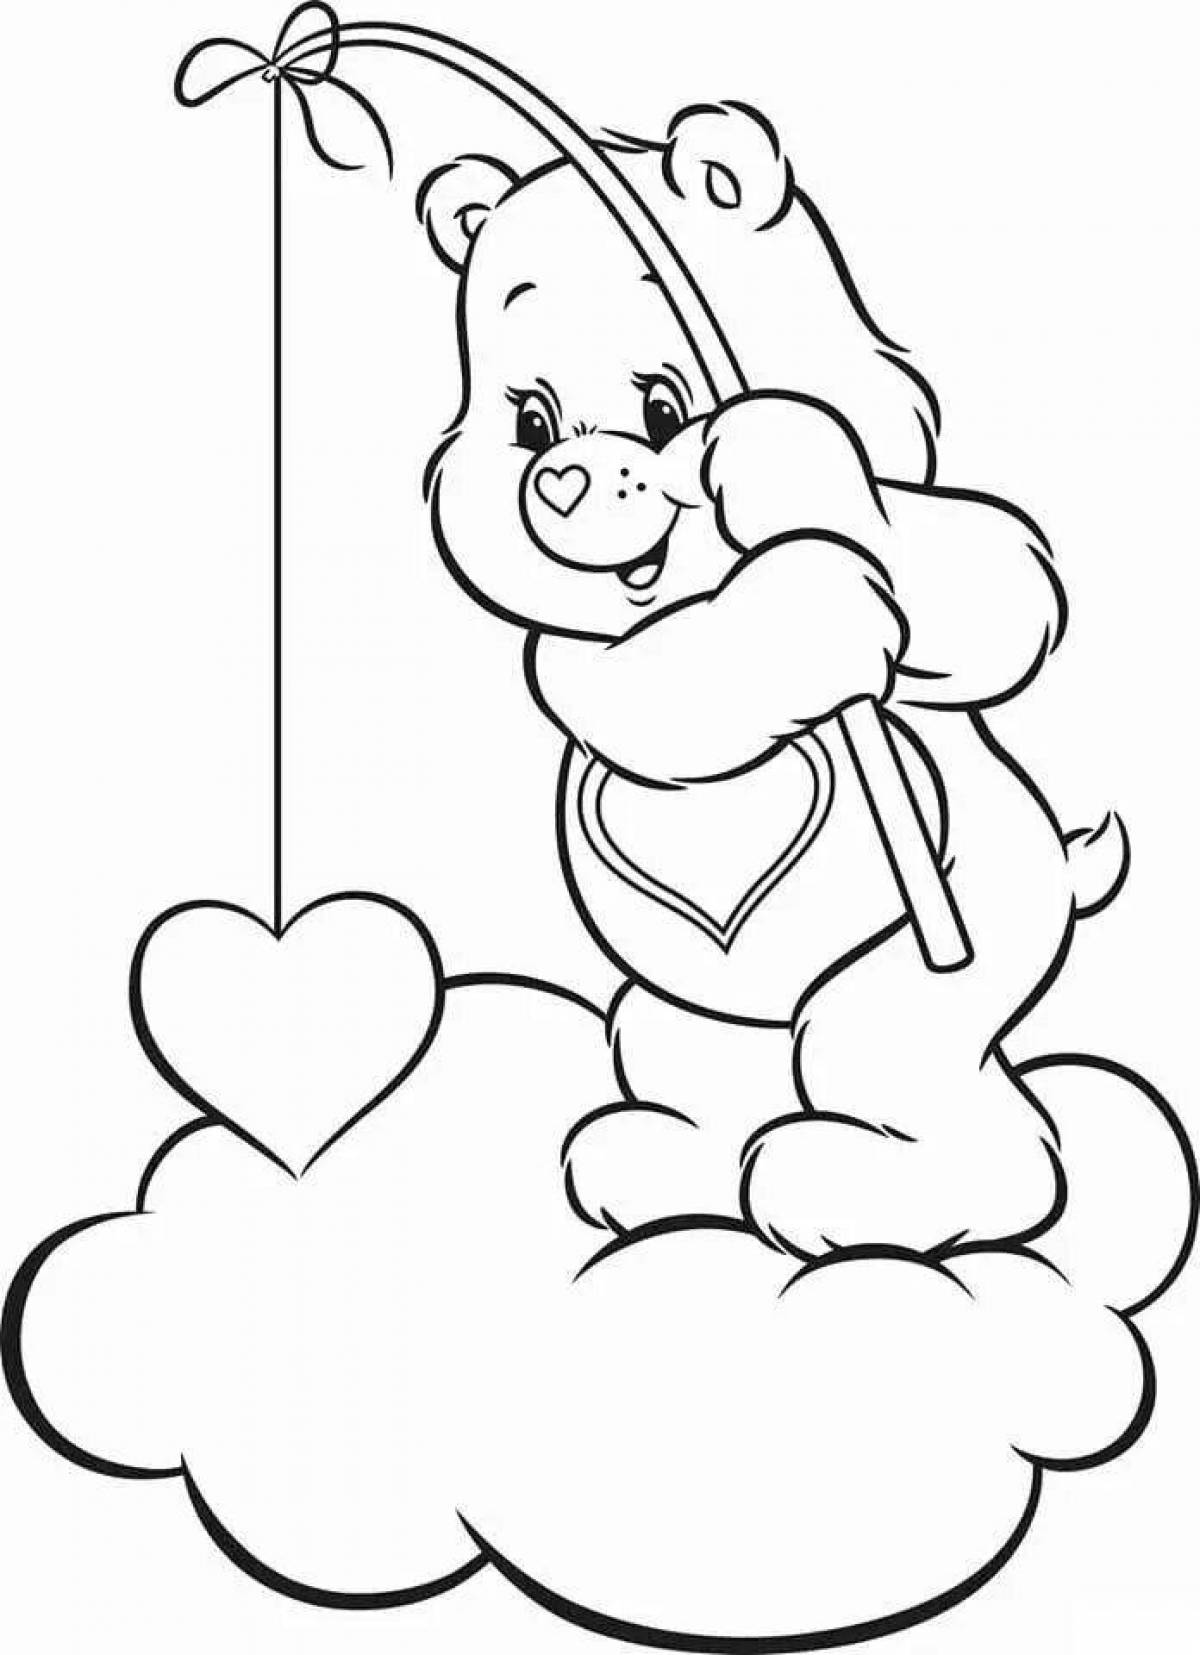 Coloring book playful teddy bear with a heart